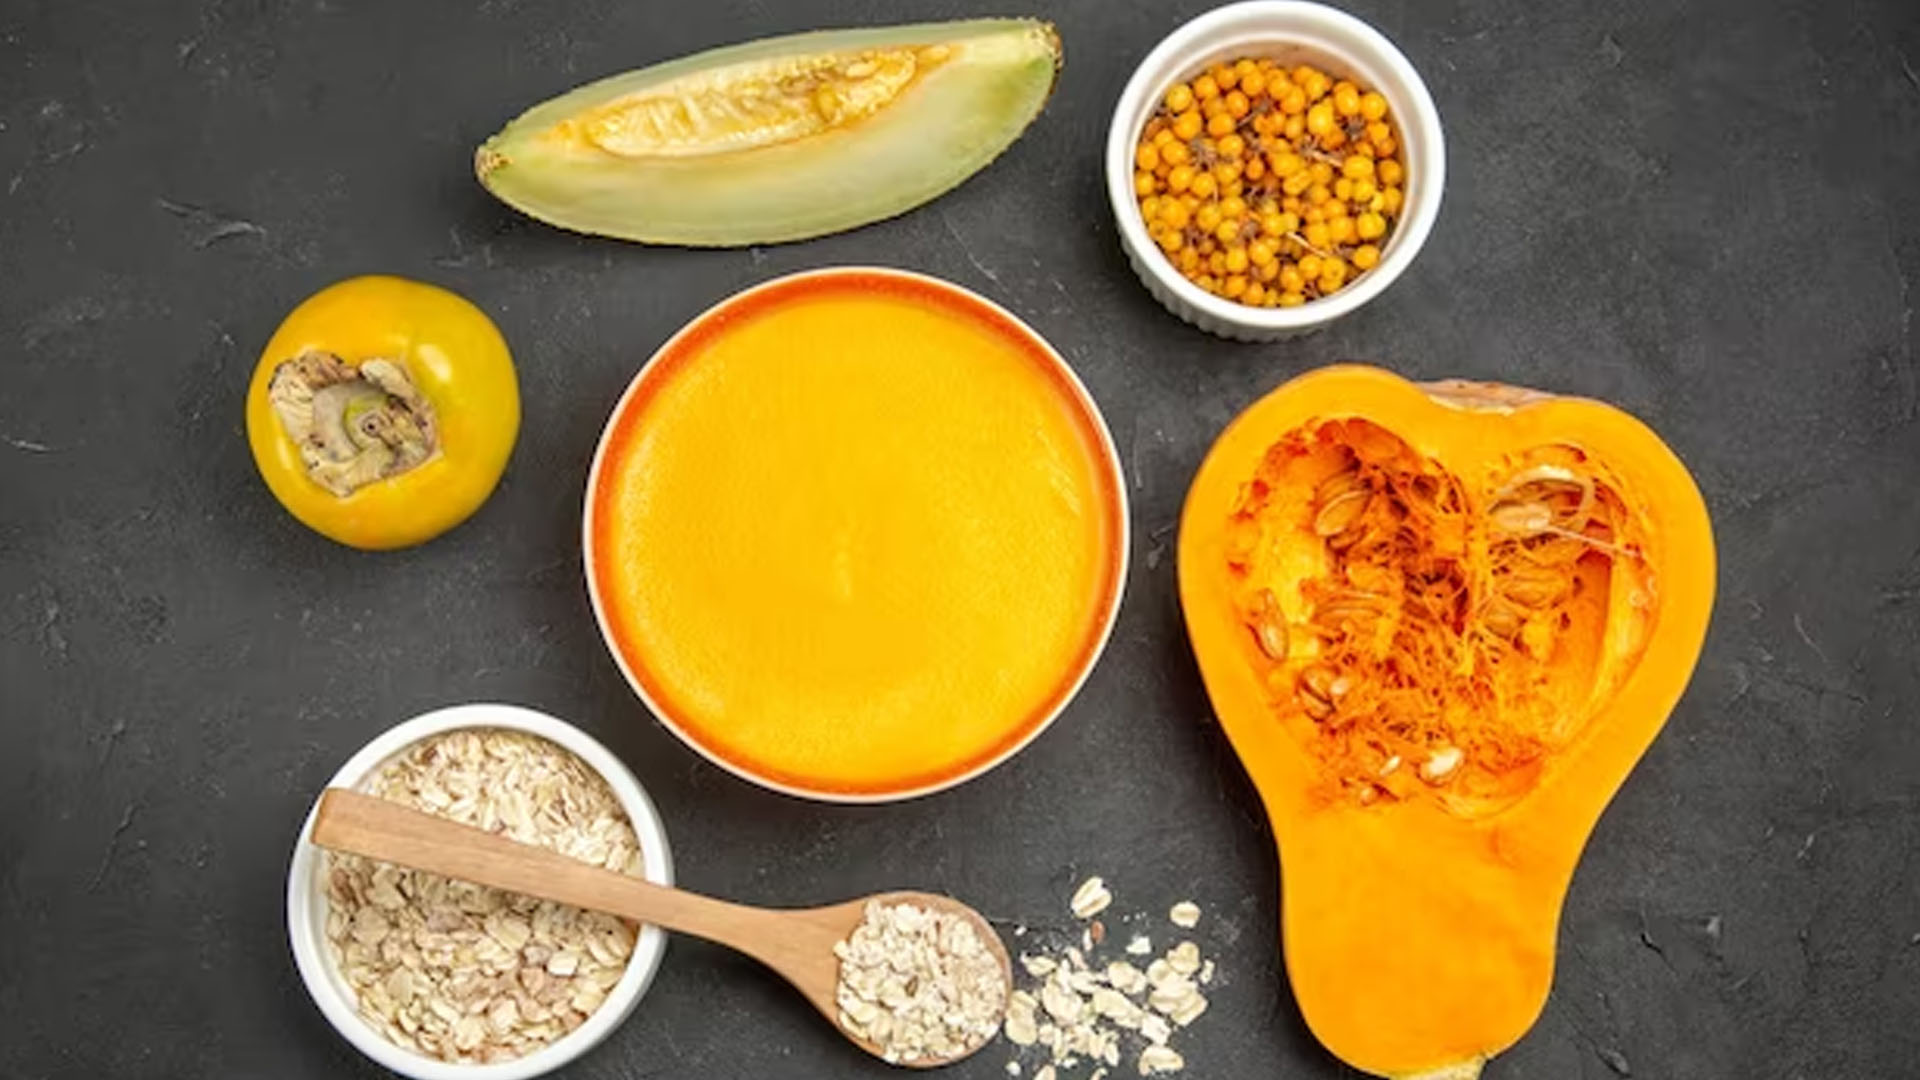 What Are The Health Benefit of Squash Seeds?